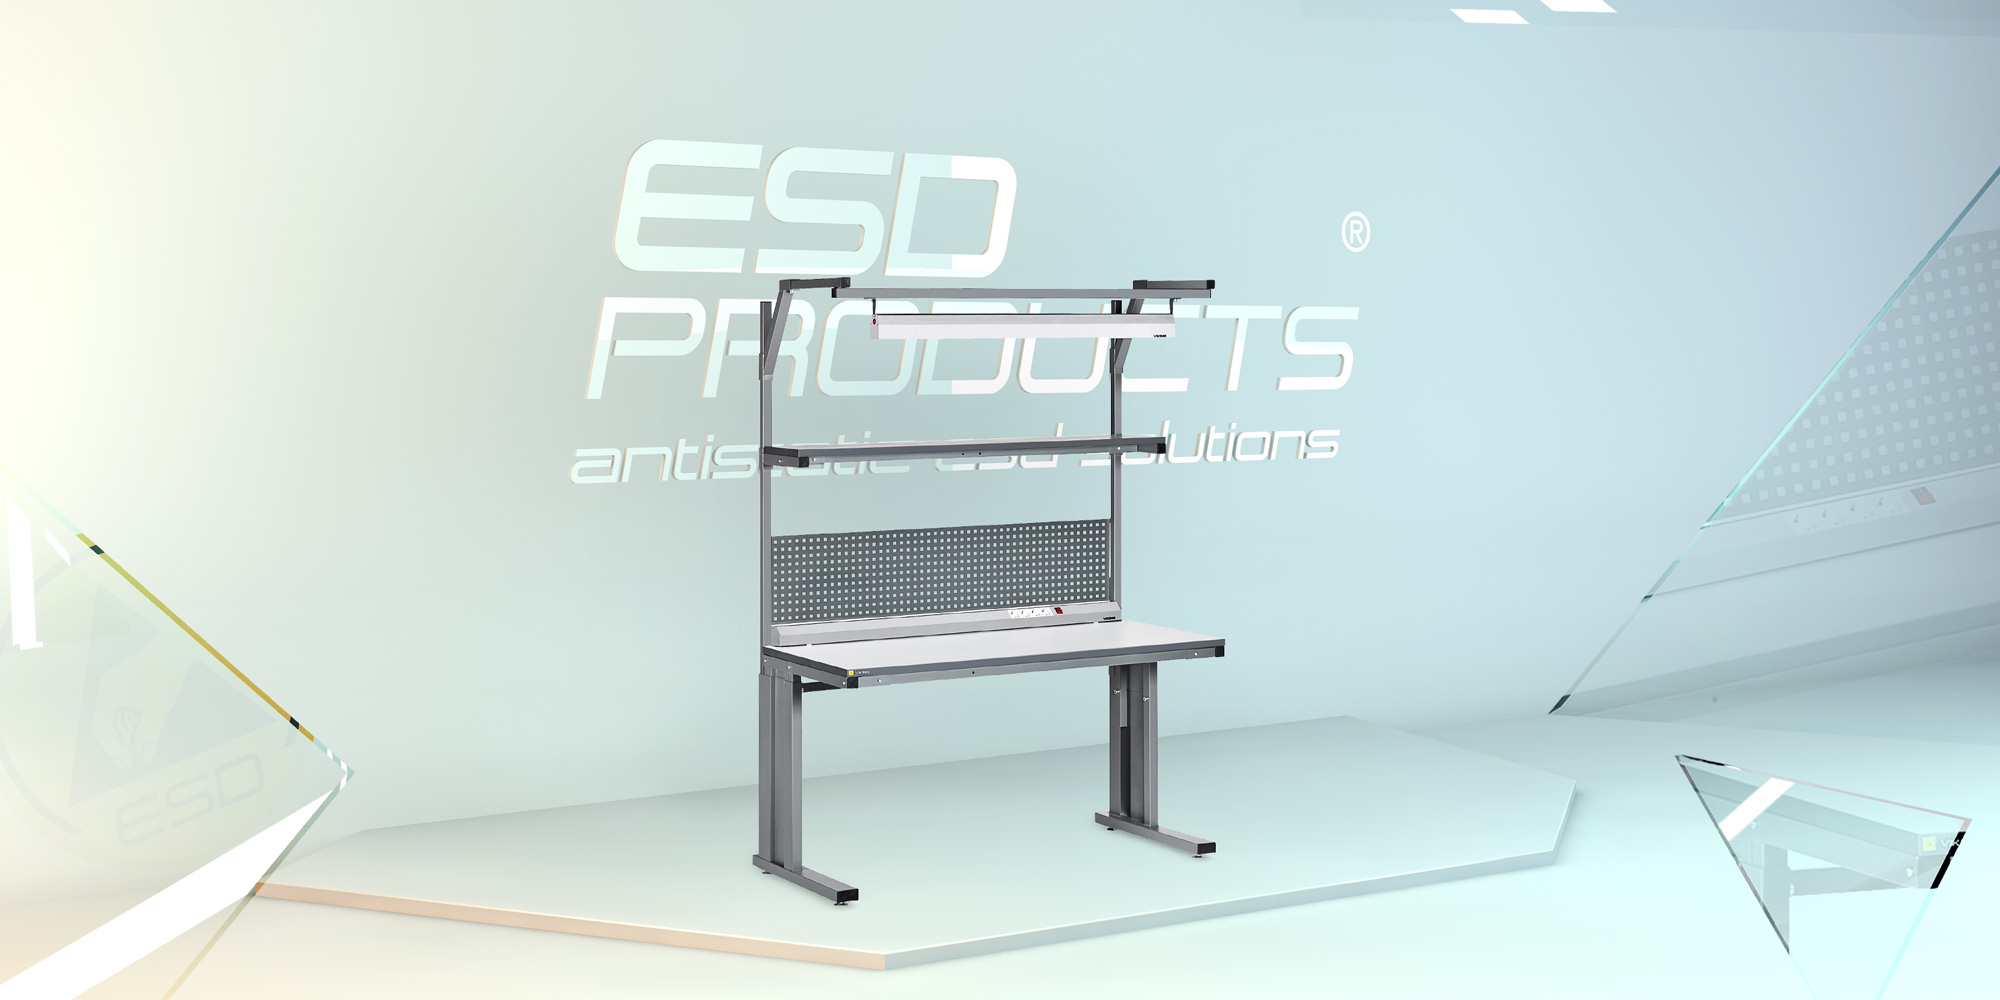 ESD-workbench-esd-workstation-Antistatic-table-electronic-workbench-Comfort-esdproducts